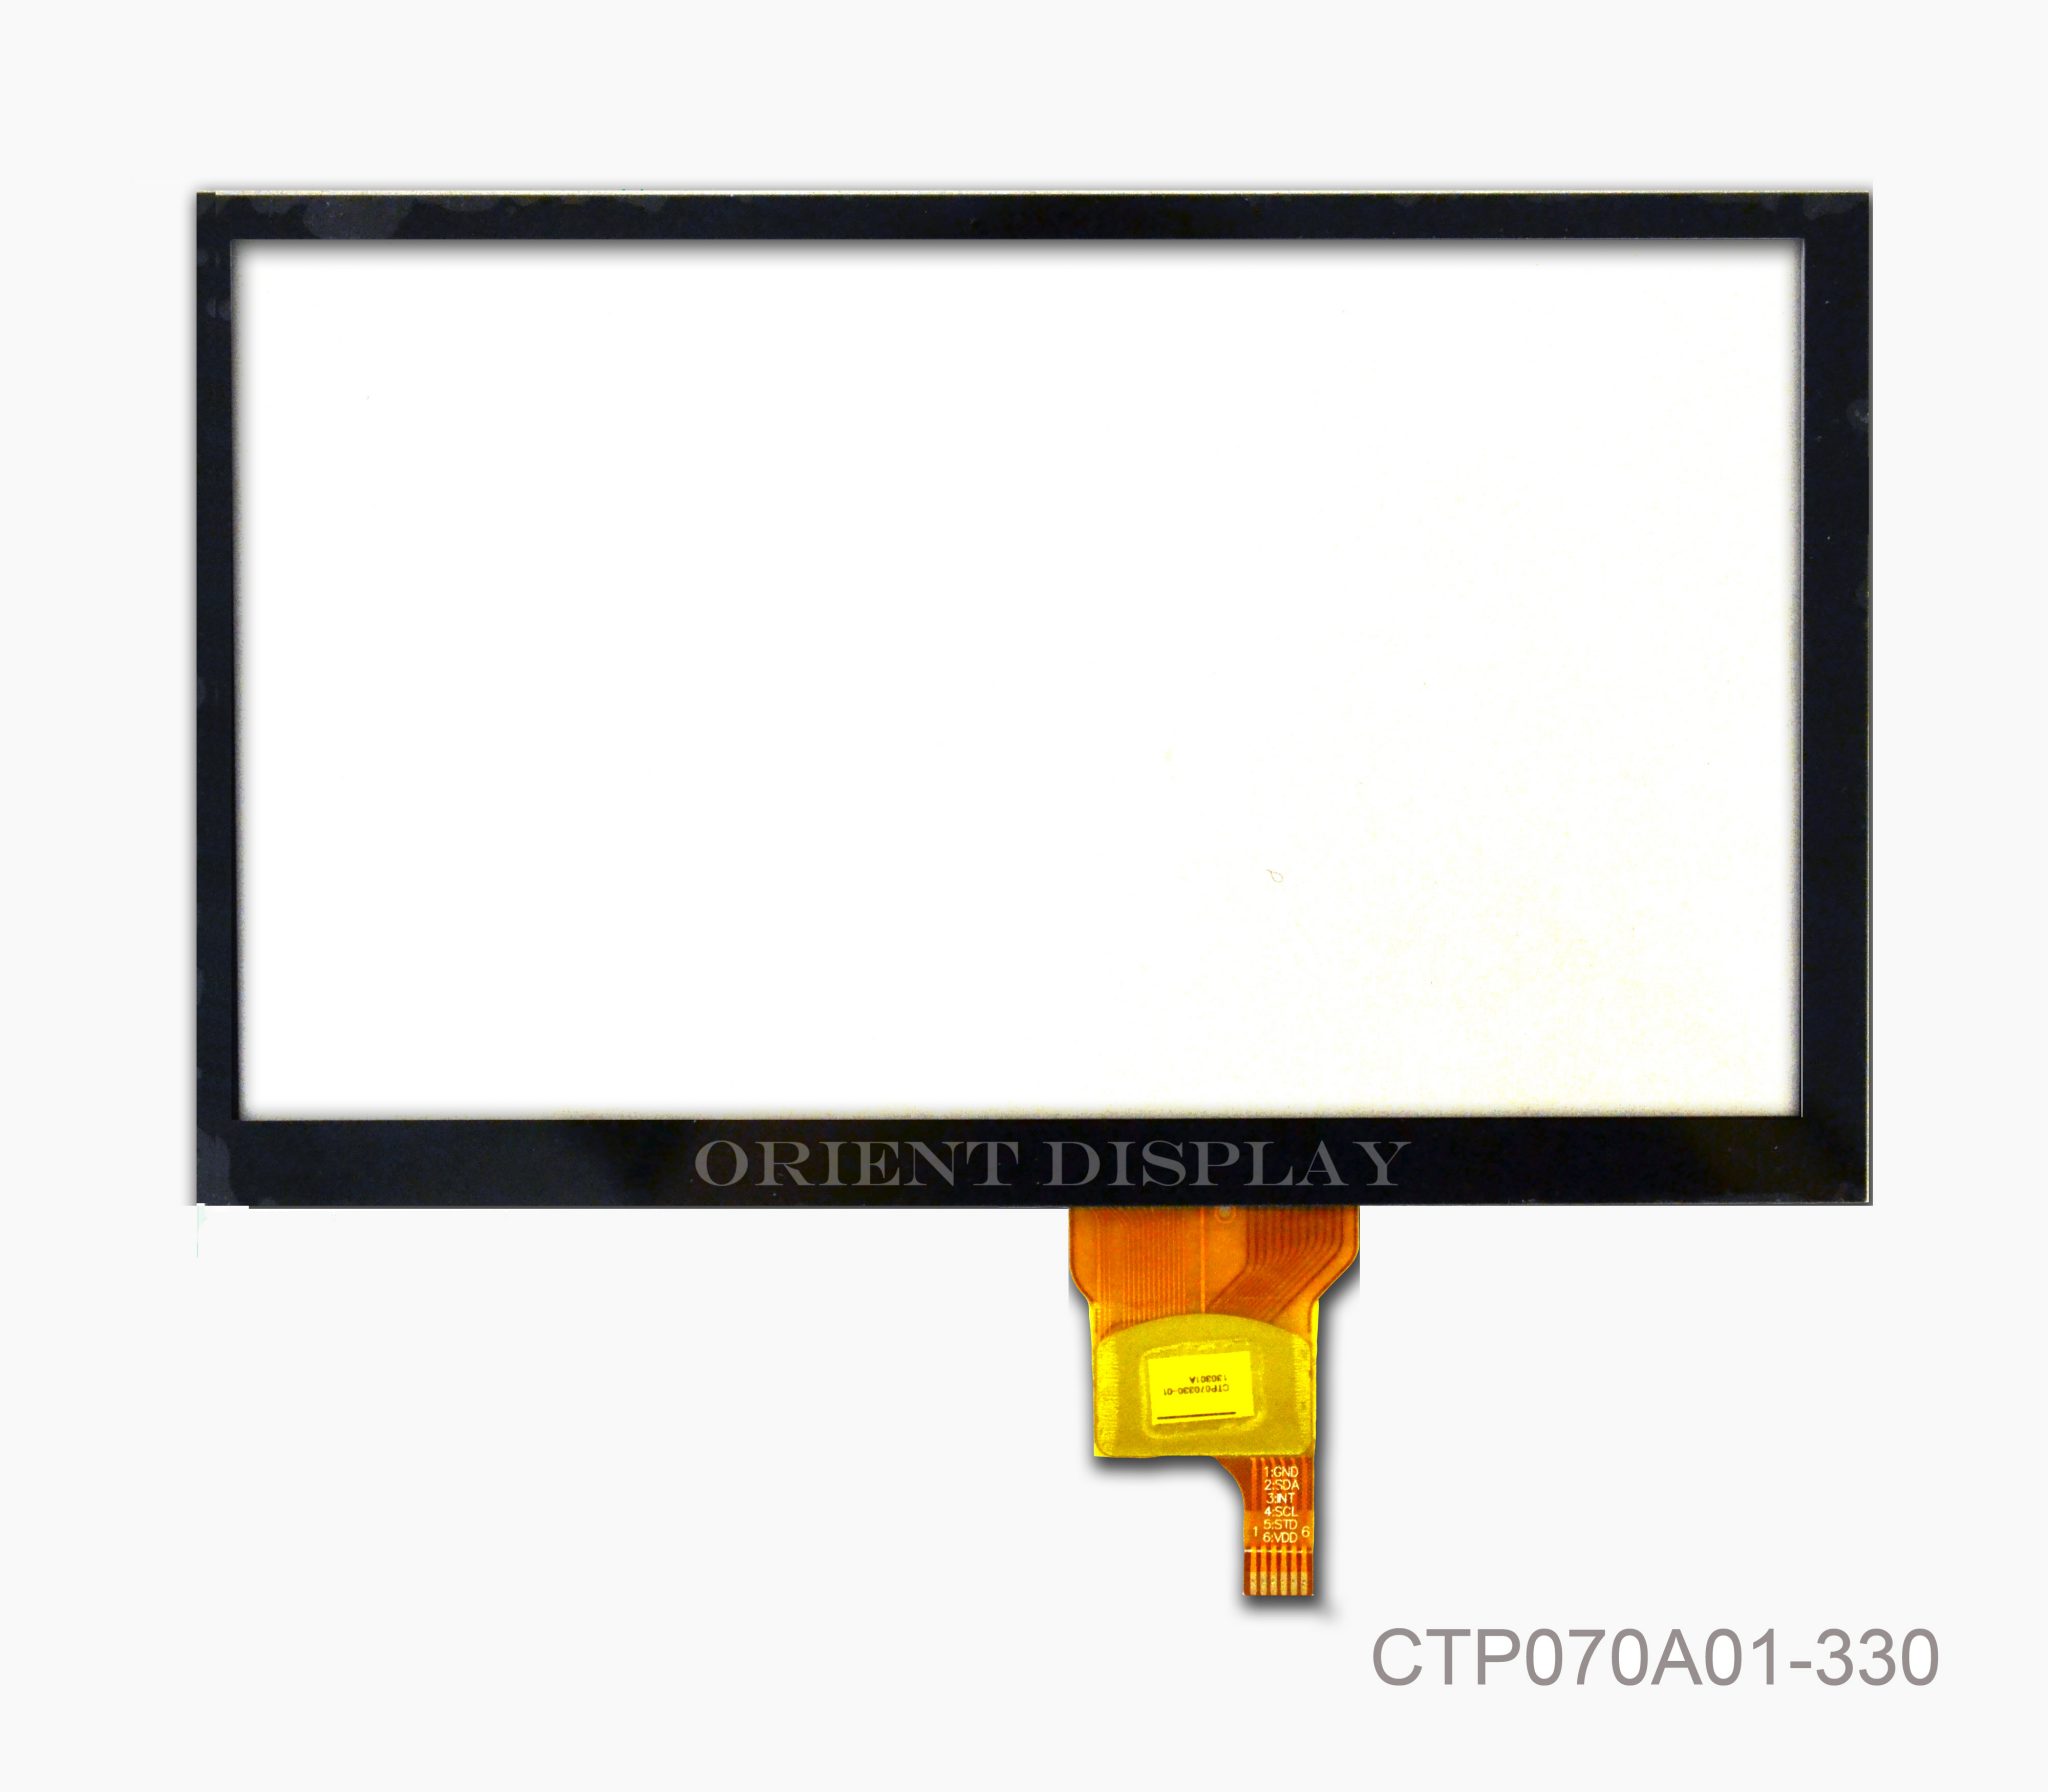 Orient Display: Capacitive Touch Panel, Part# CTP070A01-330